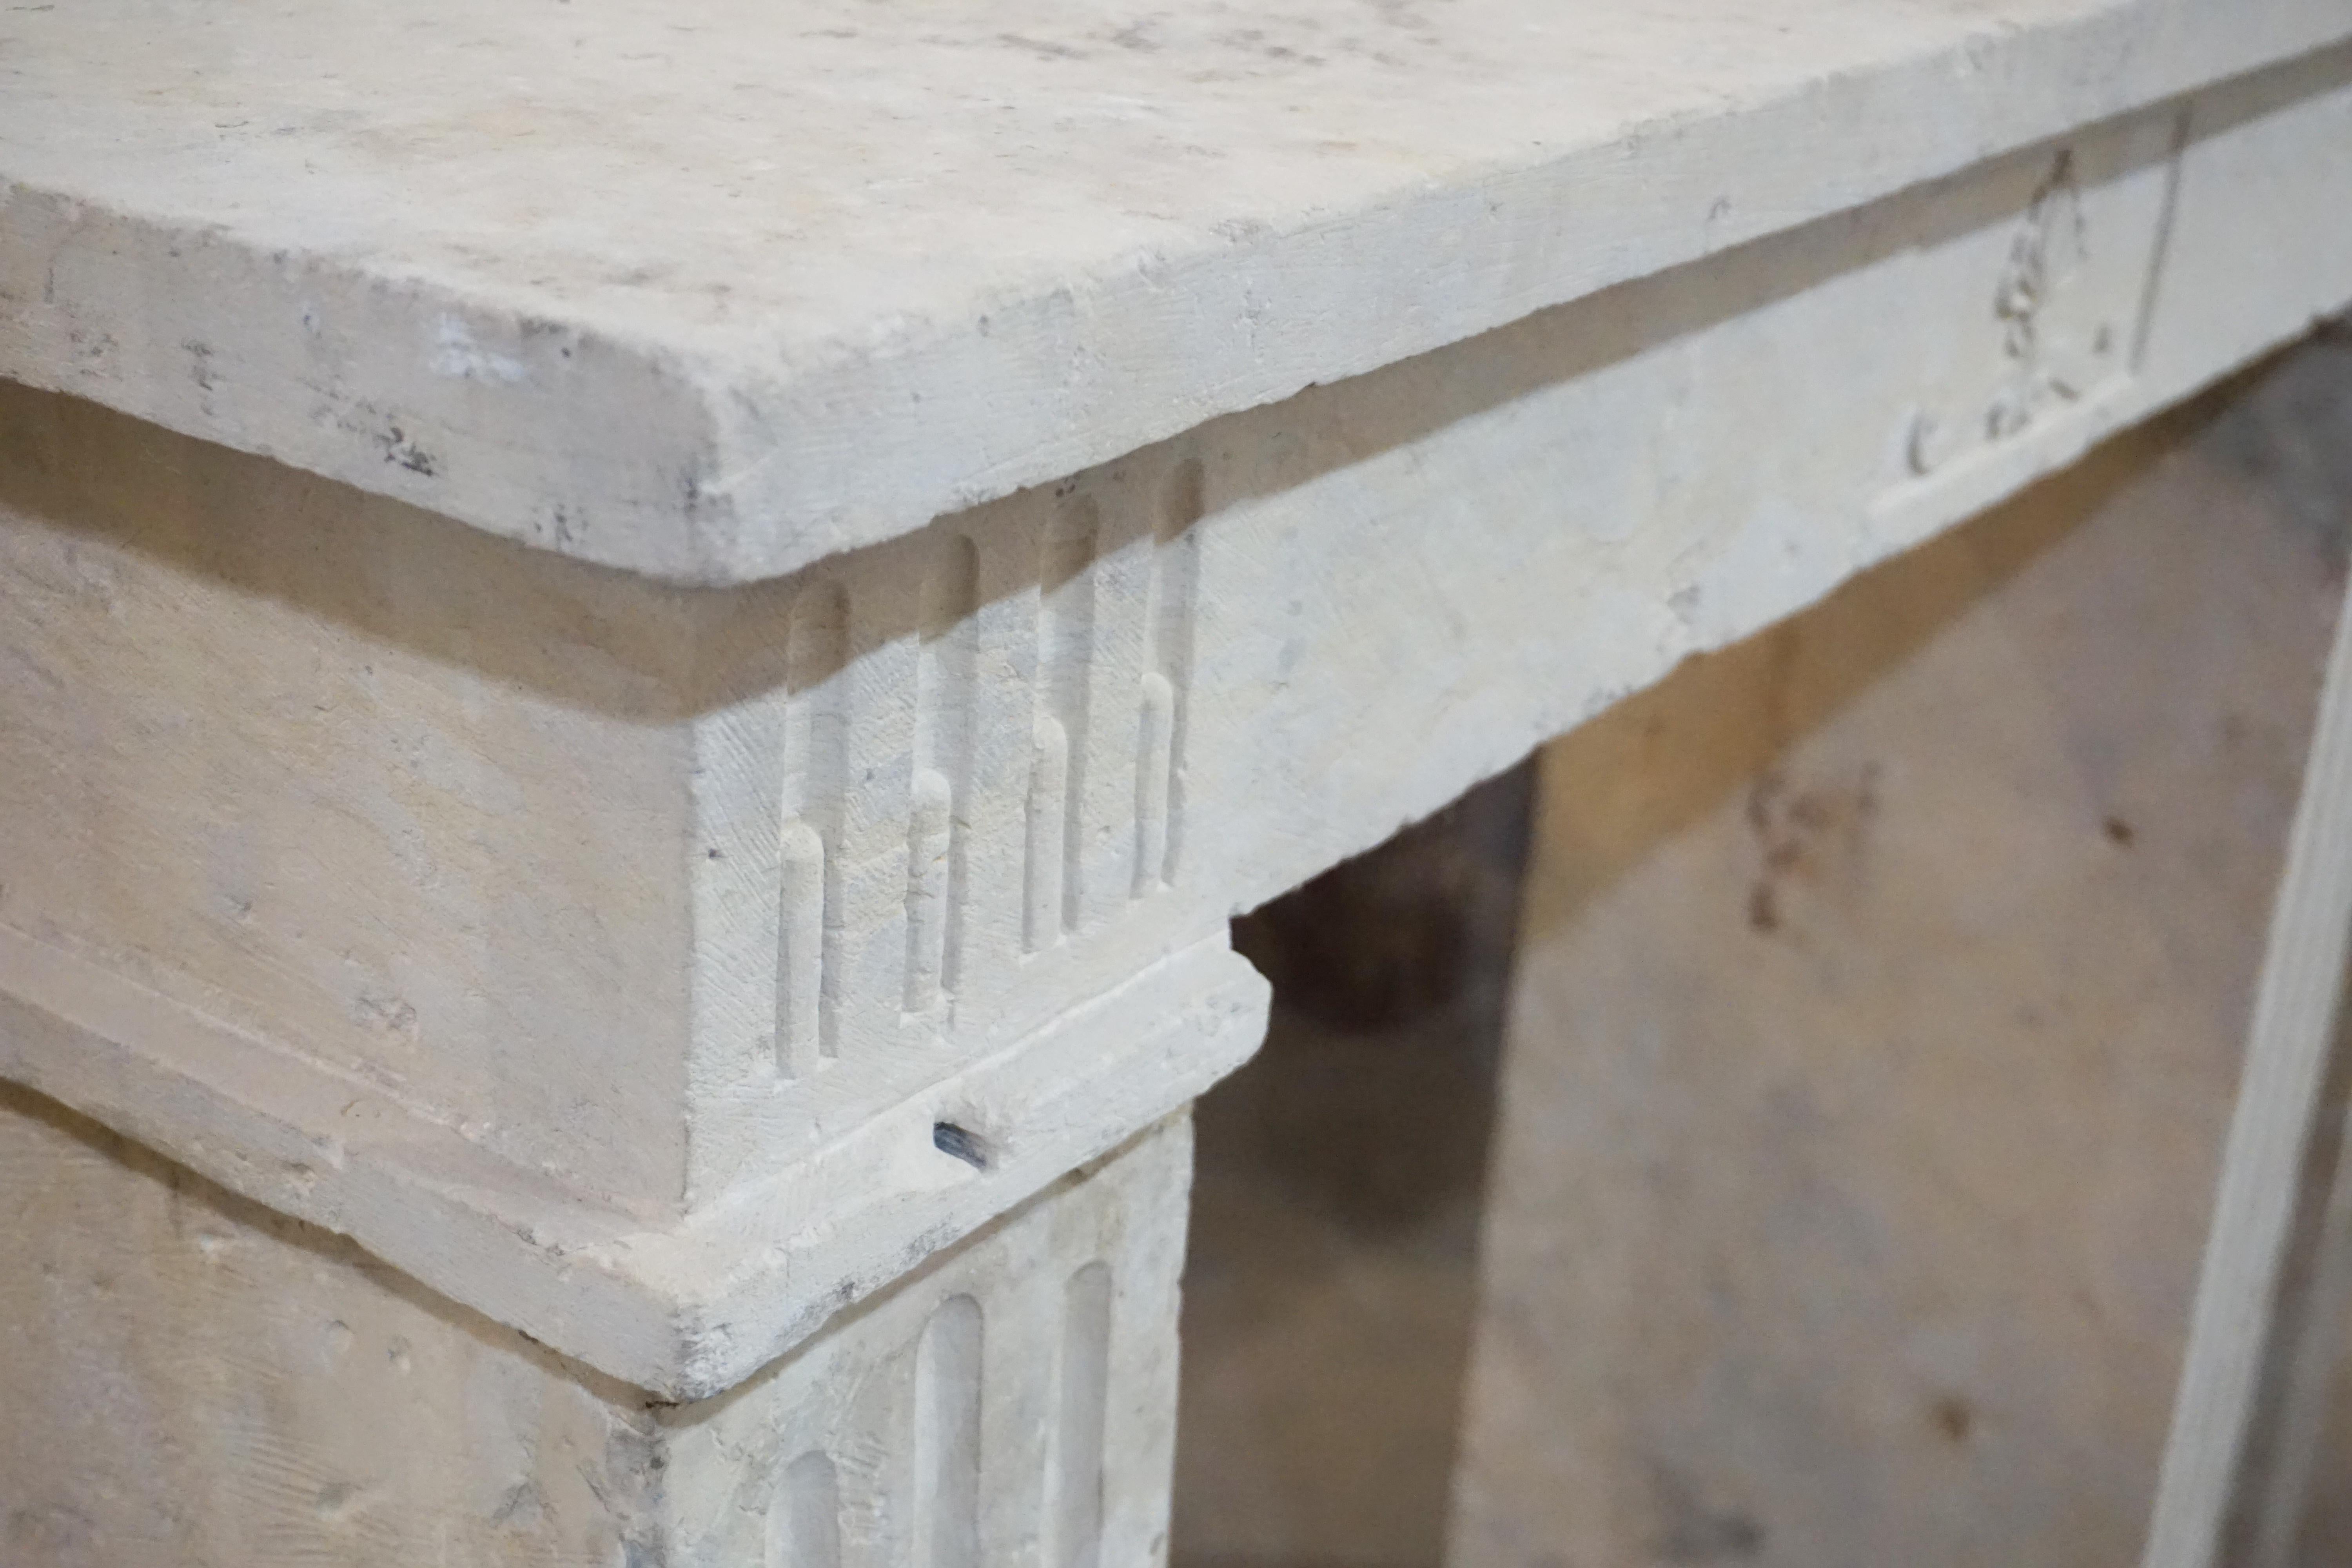 This 18th century limestone mantel features detailed carved design in the centre it's face, as well as along each leg. 

Measurements: 46'' W x 46.5'' H x 13.5'' D
Firebox: 32'' W x 40'' H.